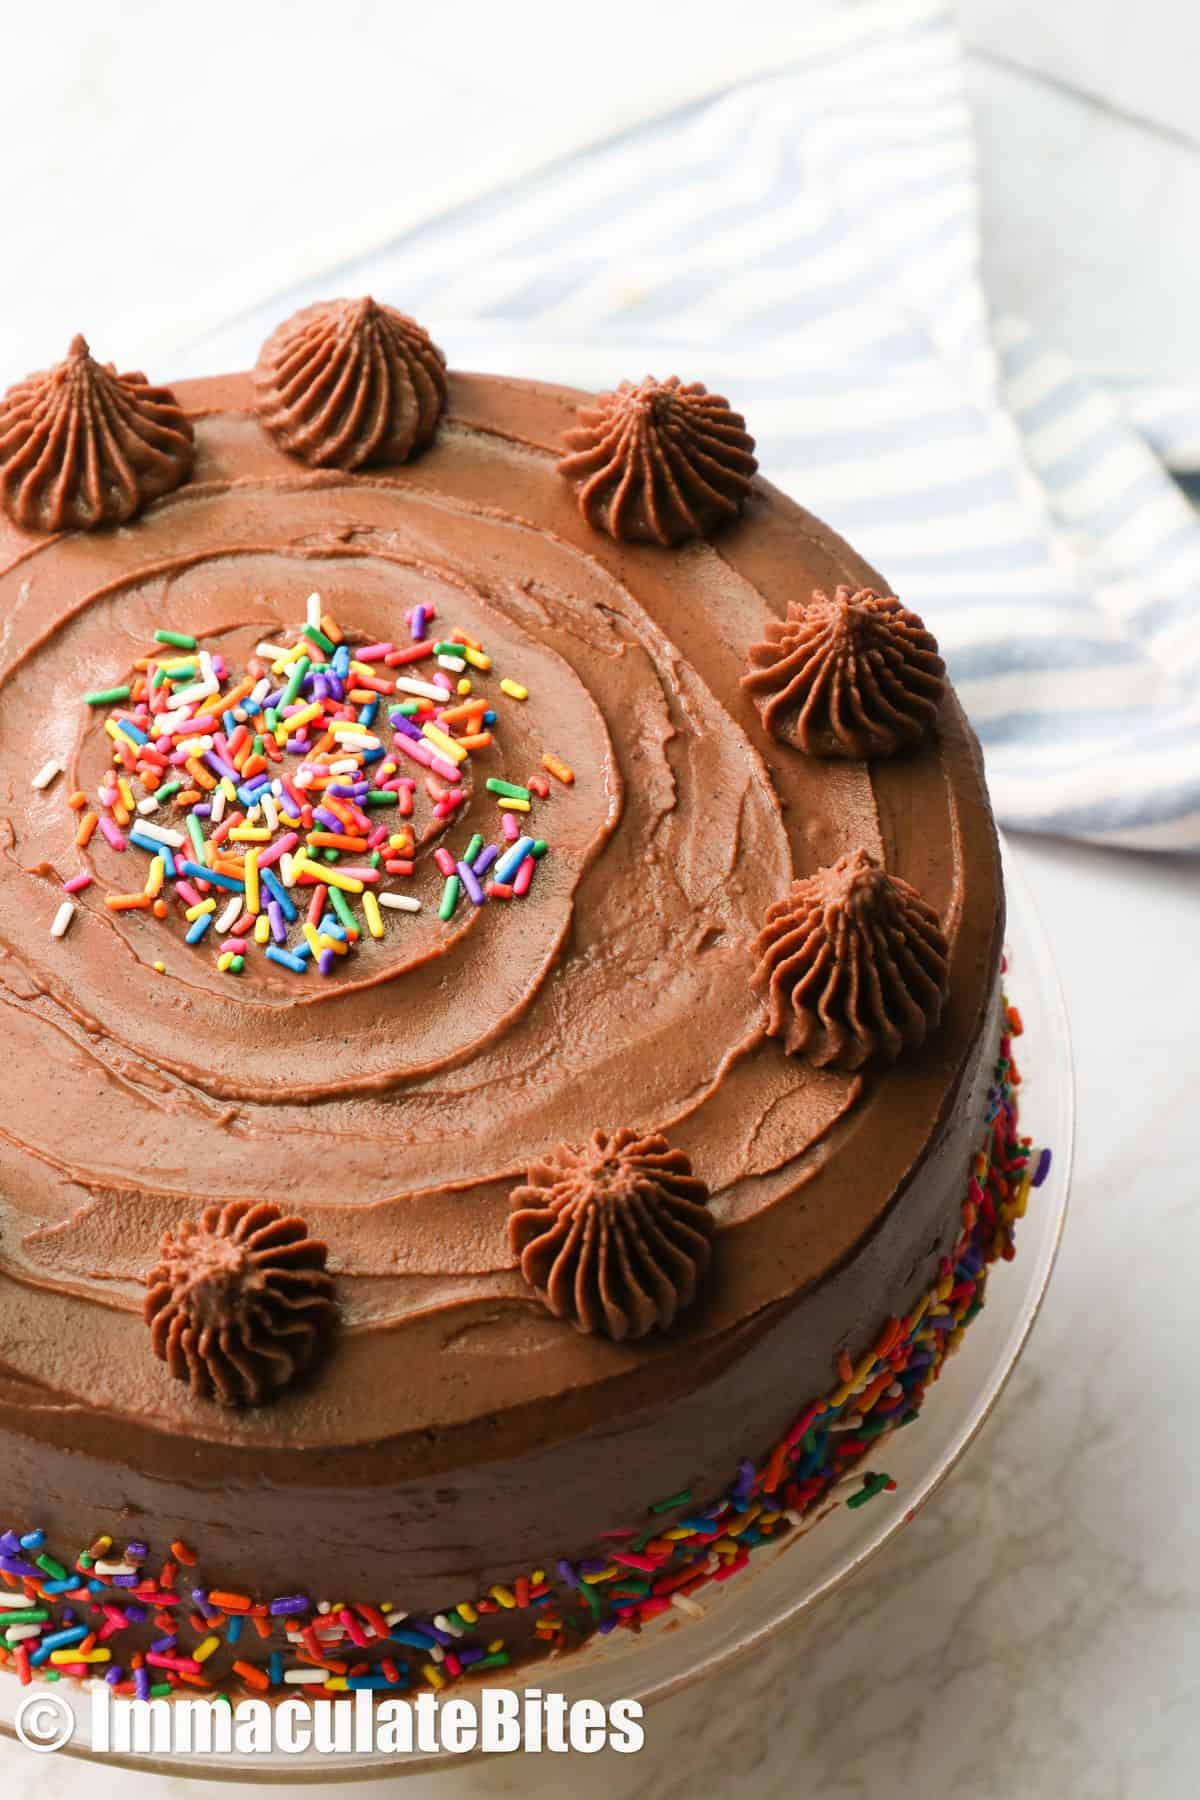 Yellow cake with chocolate frosting and sprinkles